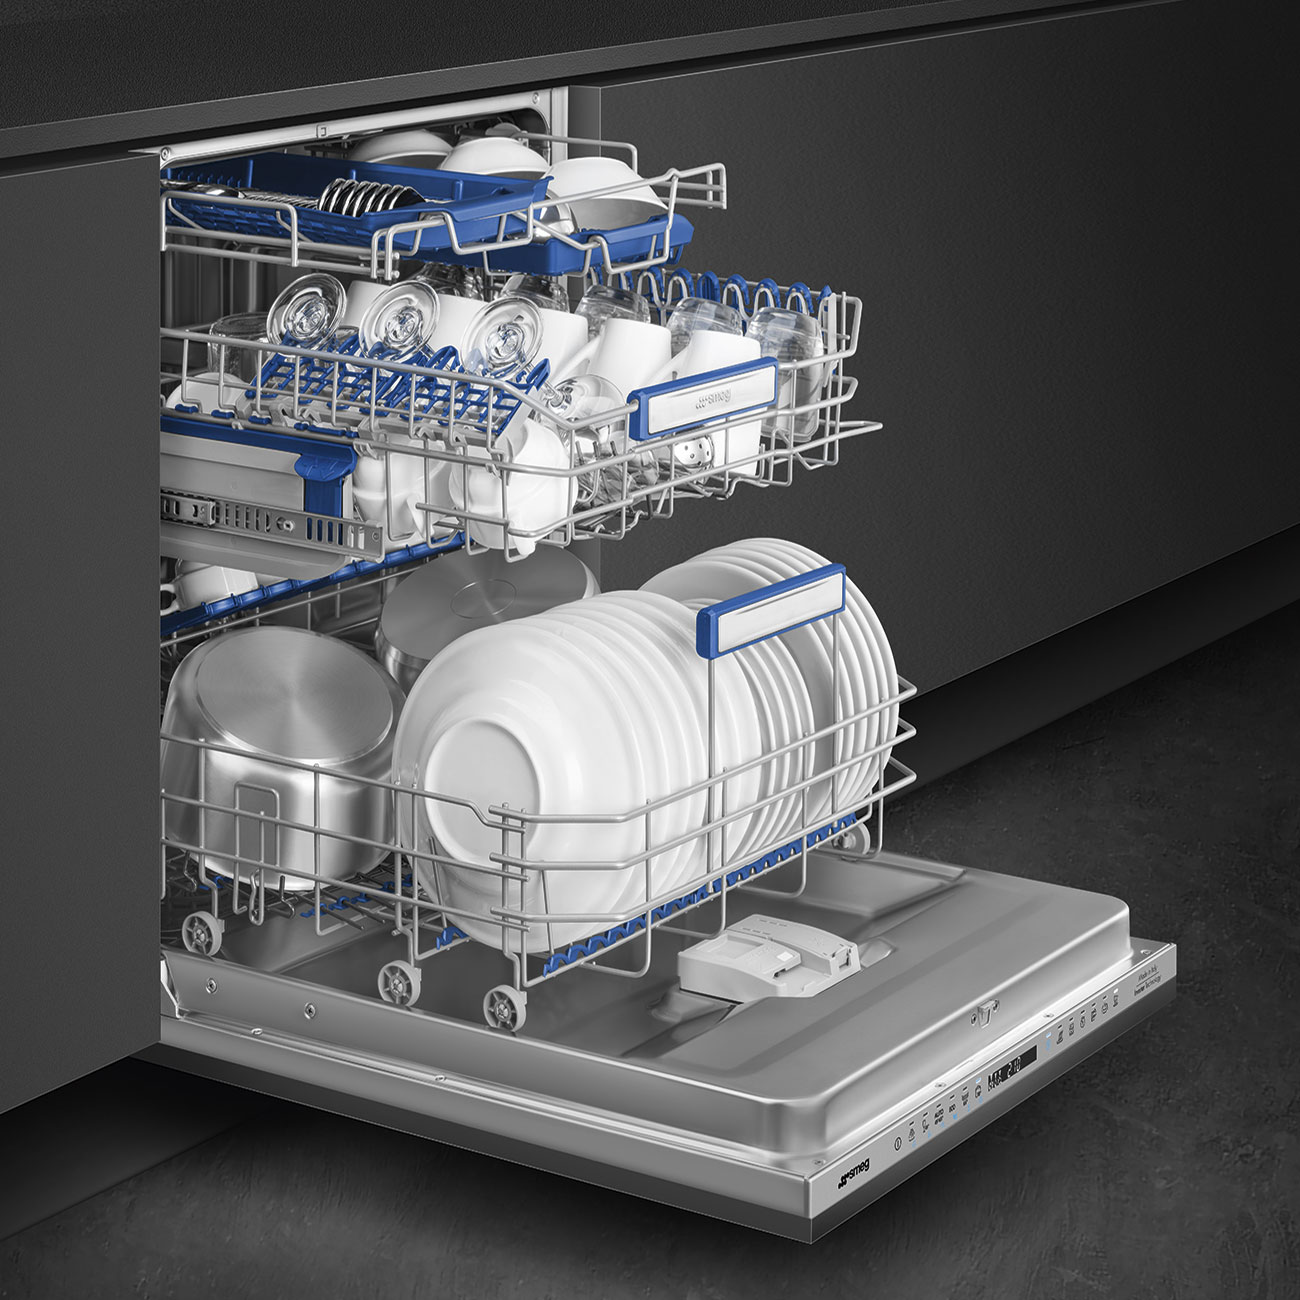 Wi-Fi Fully-integrated built-in Dishwashers 60 cm Smeg_2